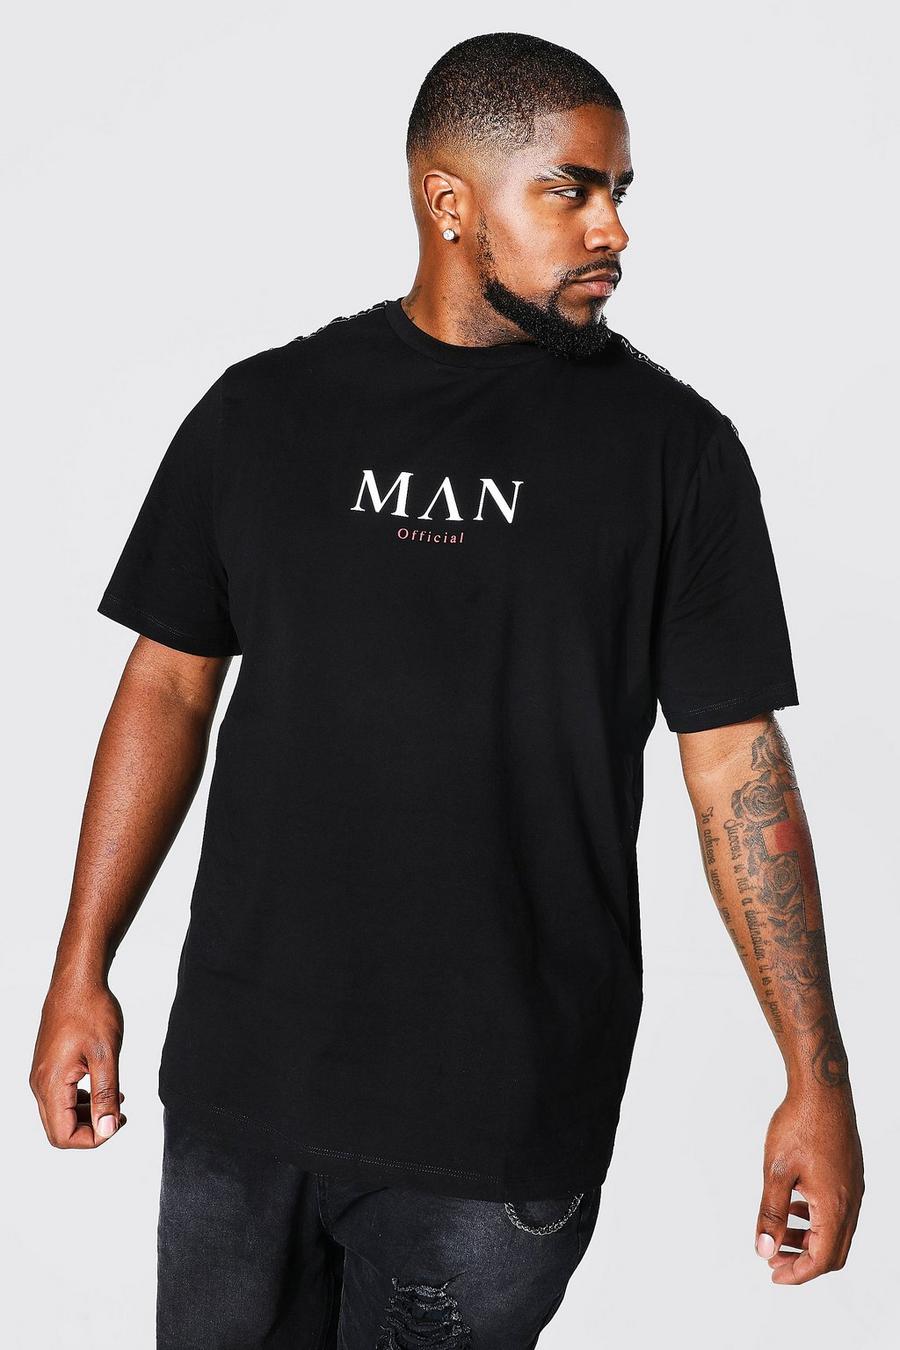 T-shirt Plus Size con banda MAN in carattere roman sulle spalle, Nero negro image number 1